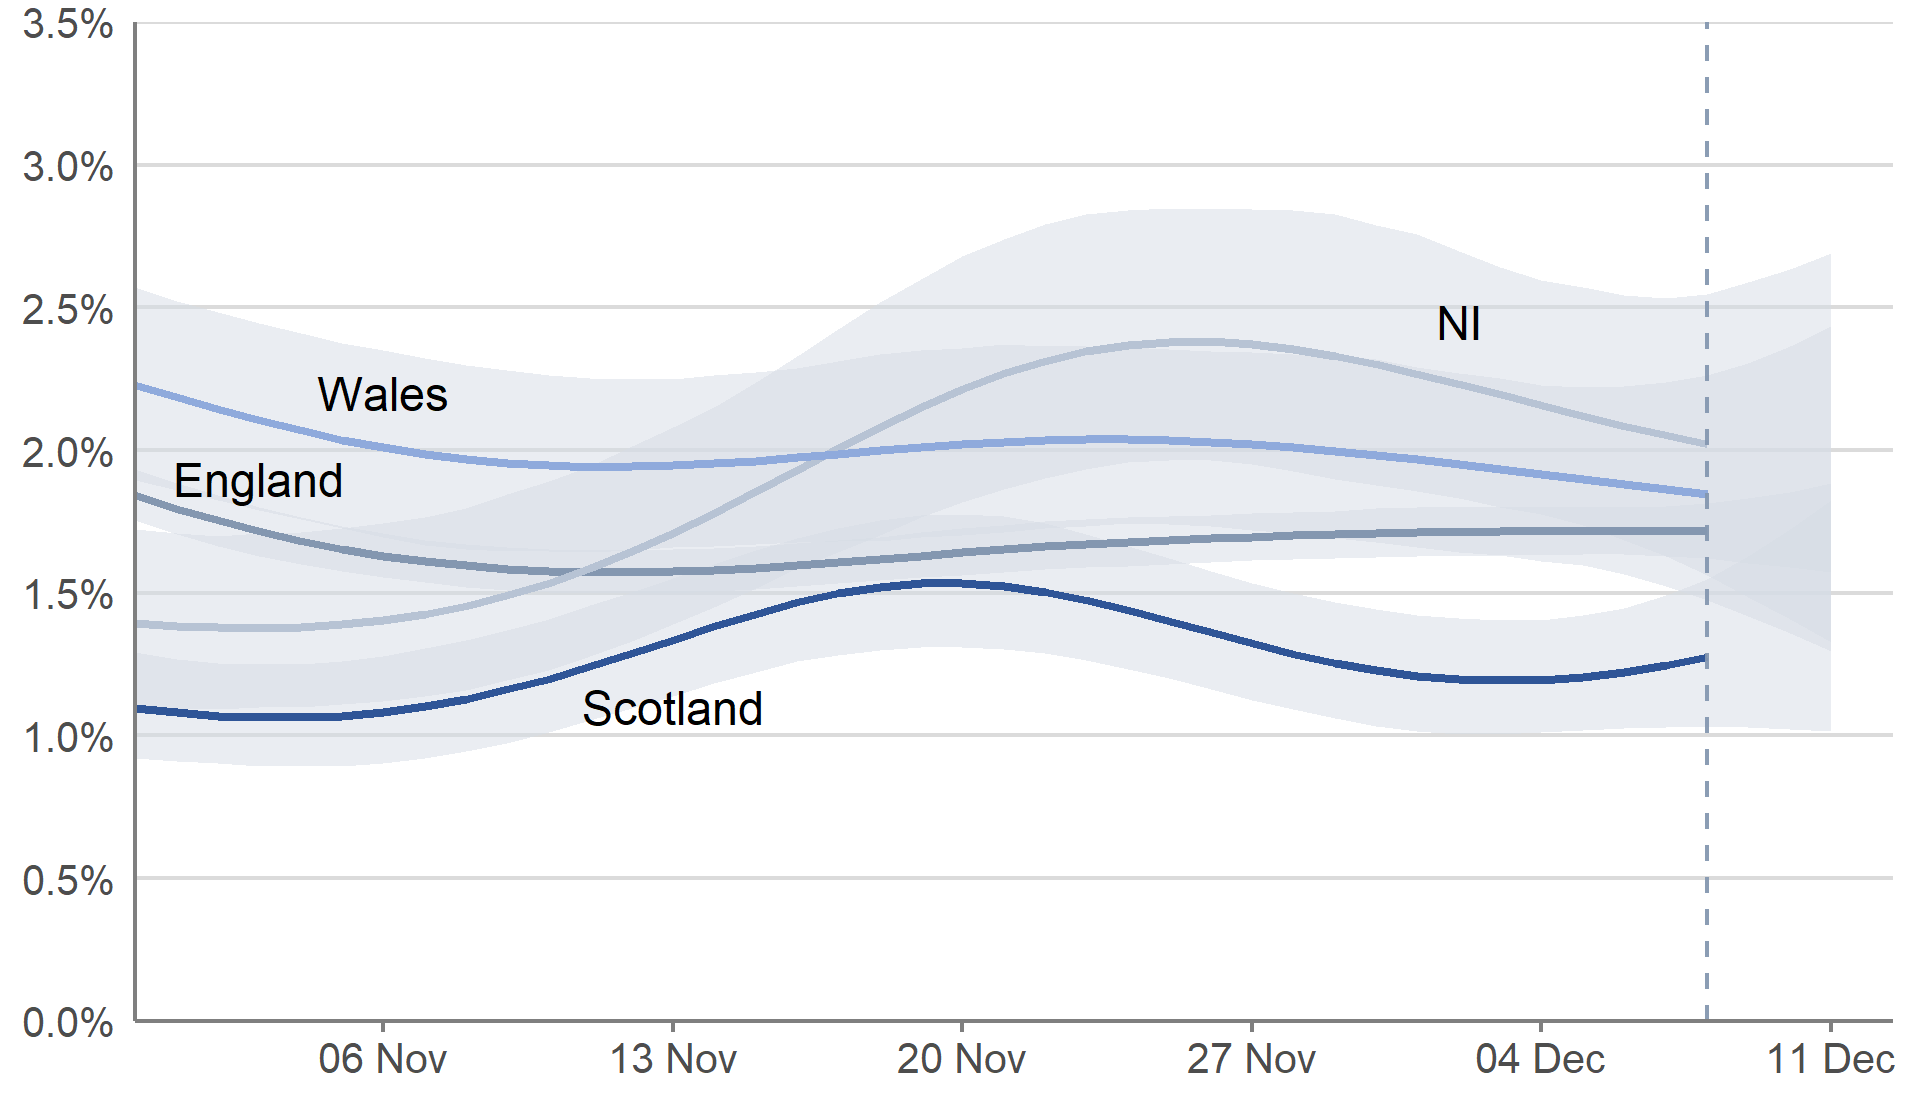 This chart shows modelled estimates of the proportion of the private residential population testing positive for COVID-19 in each of the four nations of the UK. In Scotland, the percentage of people testing positive for COVID-19 has decreased over the most recent two weeks, however the trend is uncertain in the most recent week. In England and Wales, the trend in the percentage of people testing positive in private residential households is uncertain in the most recent week. In Northern Ireland, the percentage of people testing positive in private residential households has decreased in the most recent week. For all Four Nations, the most recent week of estimates is for 5 to 11 December.